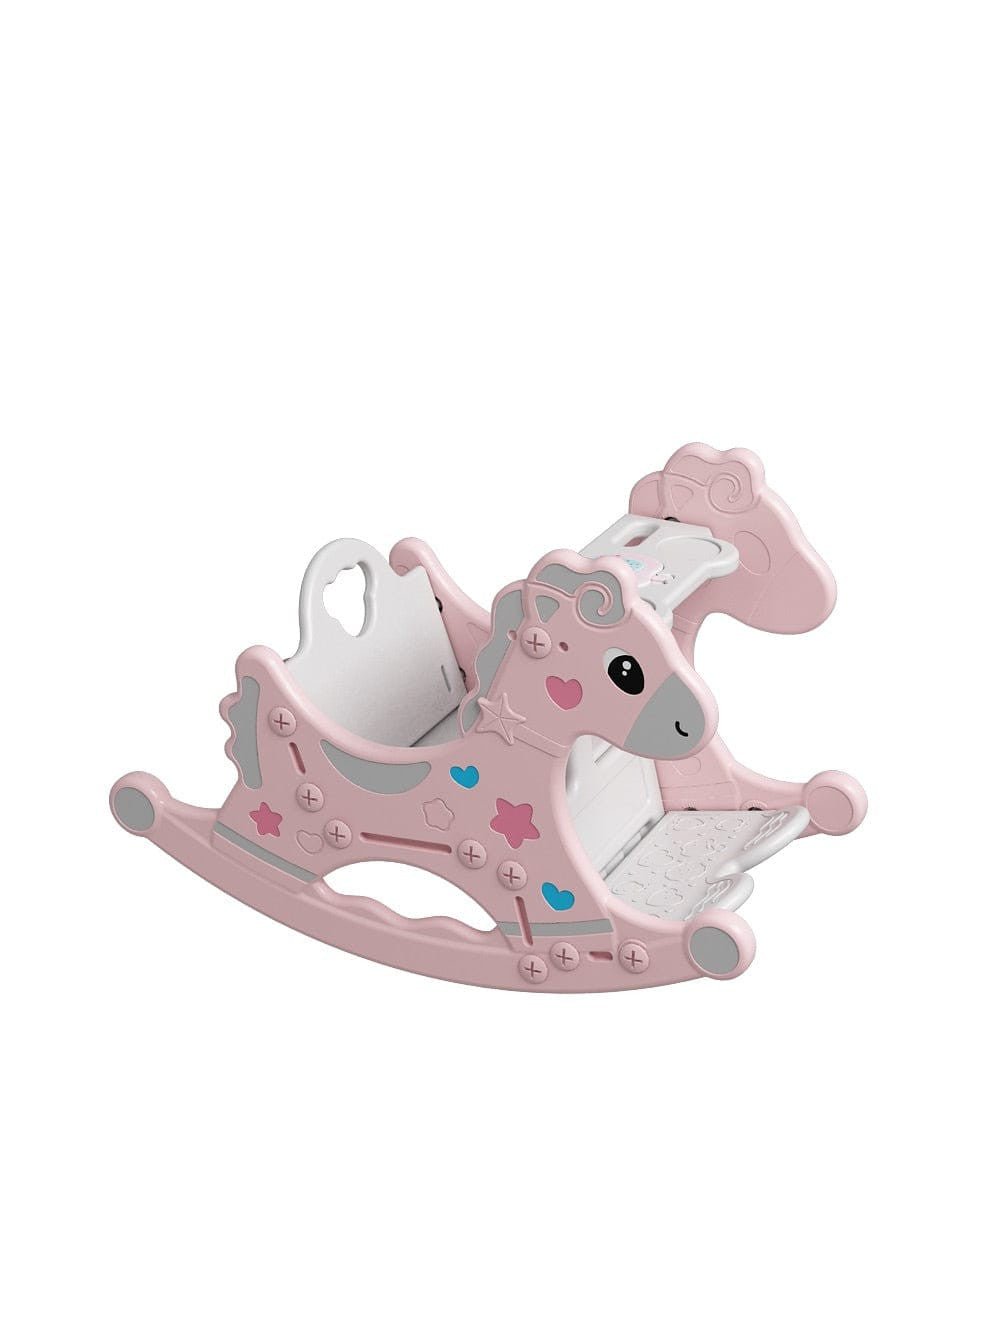 Seated Mode Rocking Horse - Micky Mart